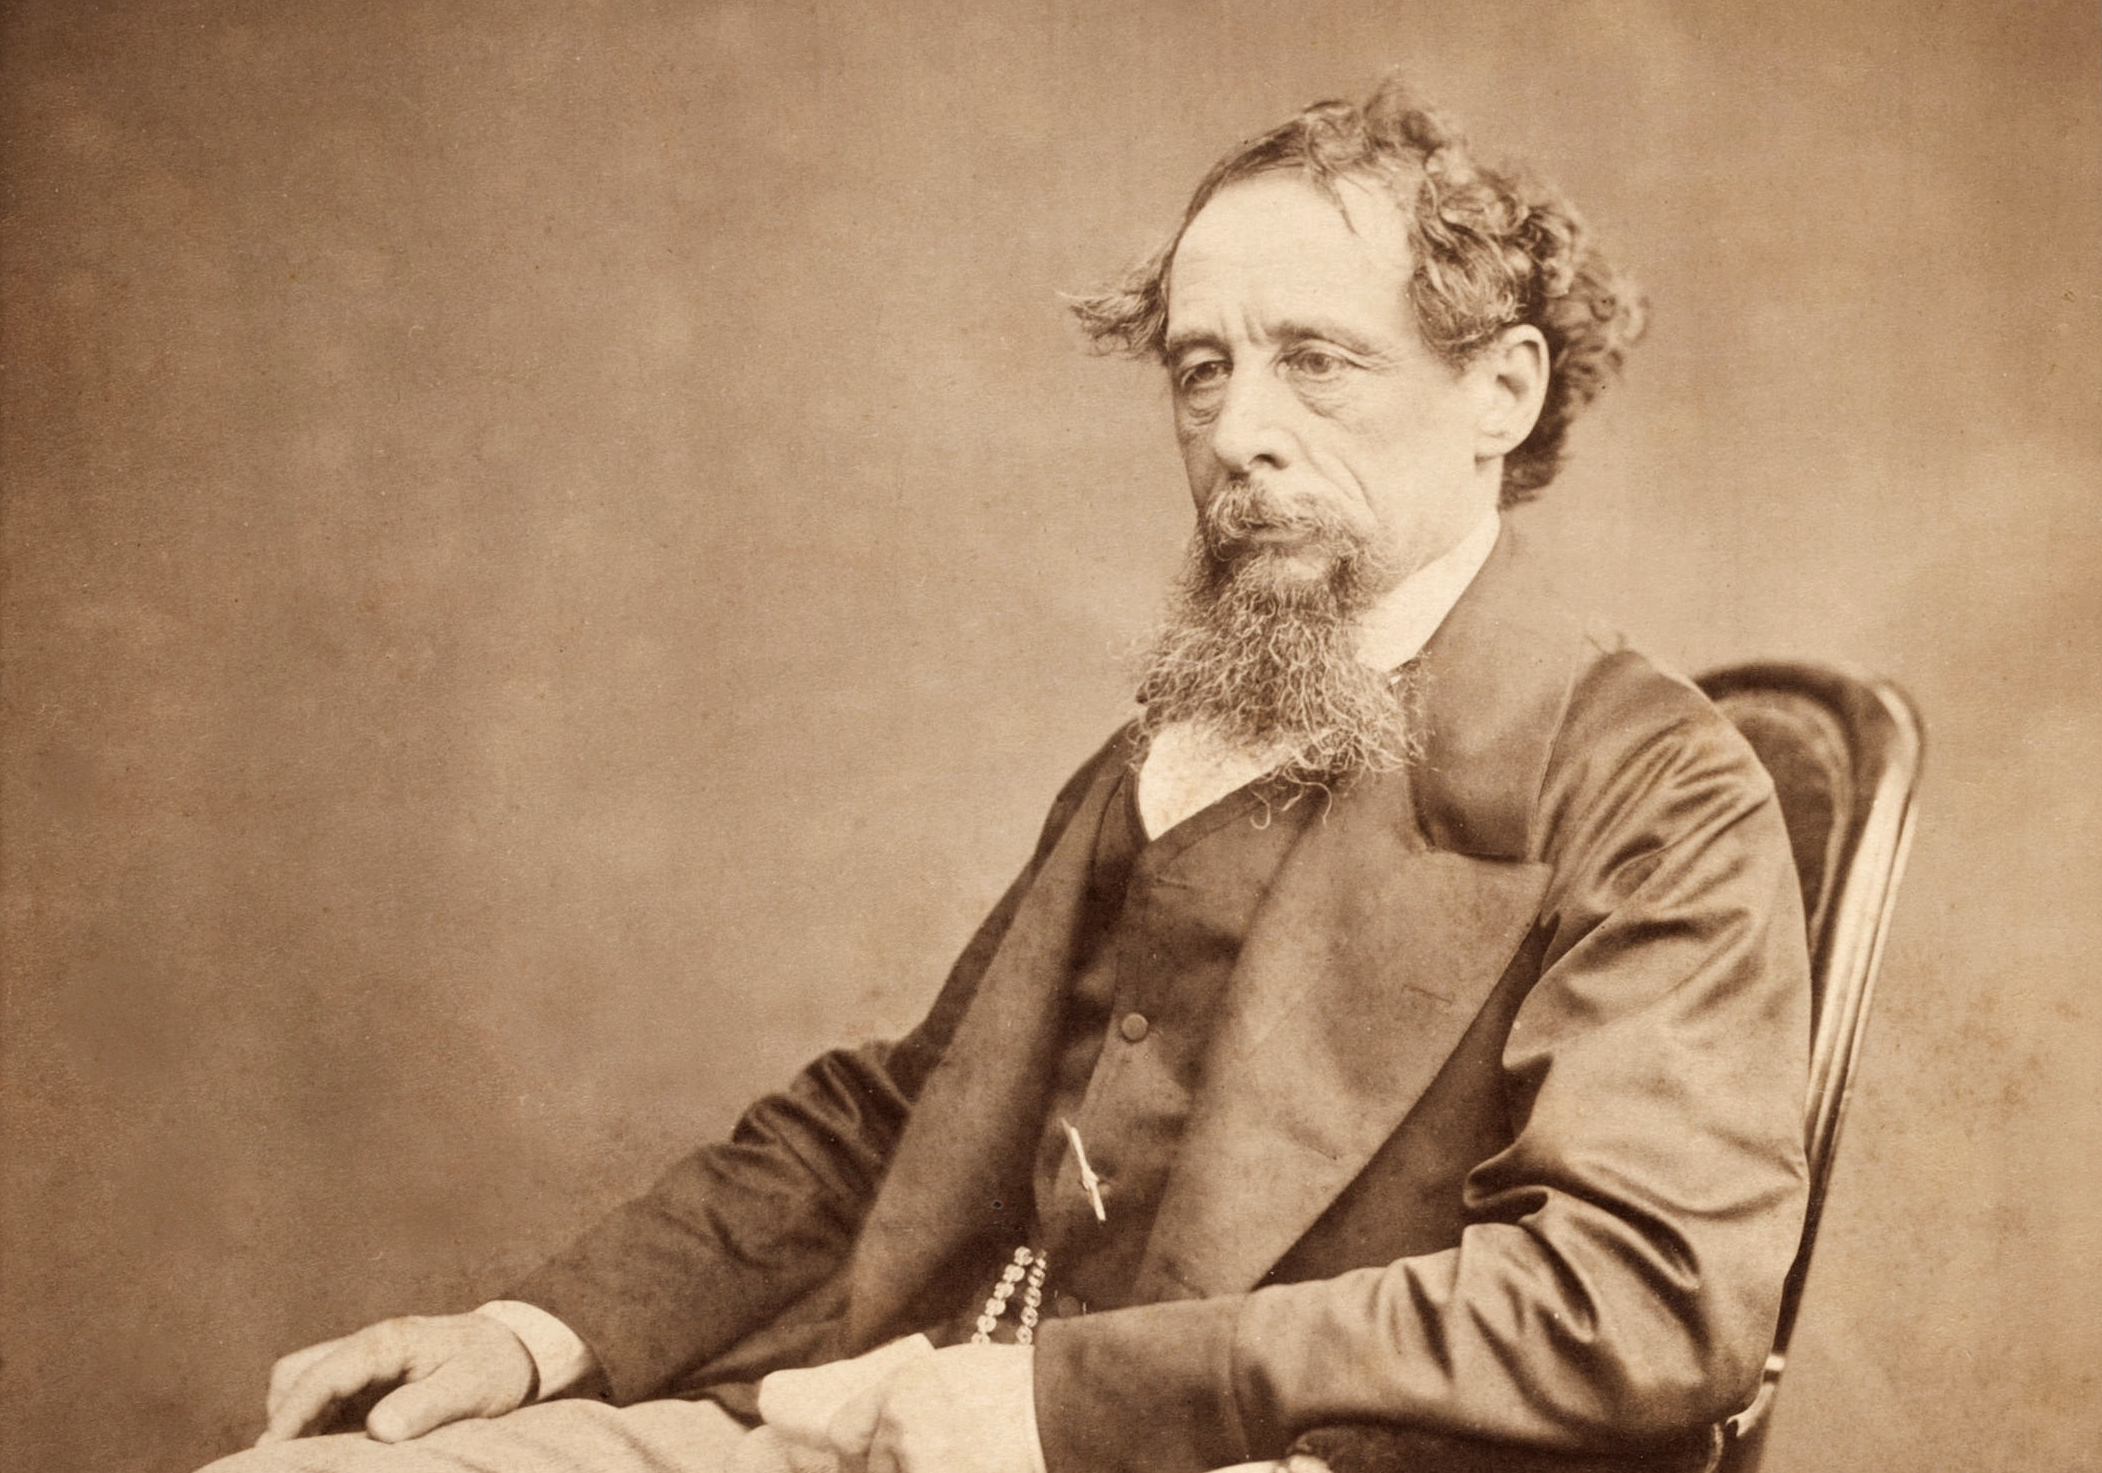 Tales of Charles Dickens as father, philanderer